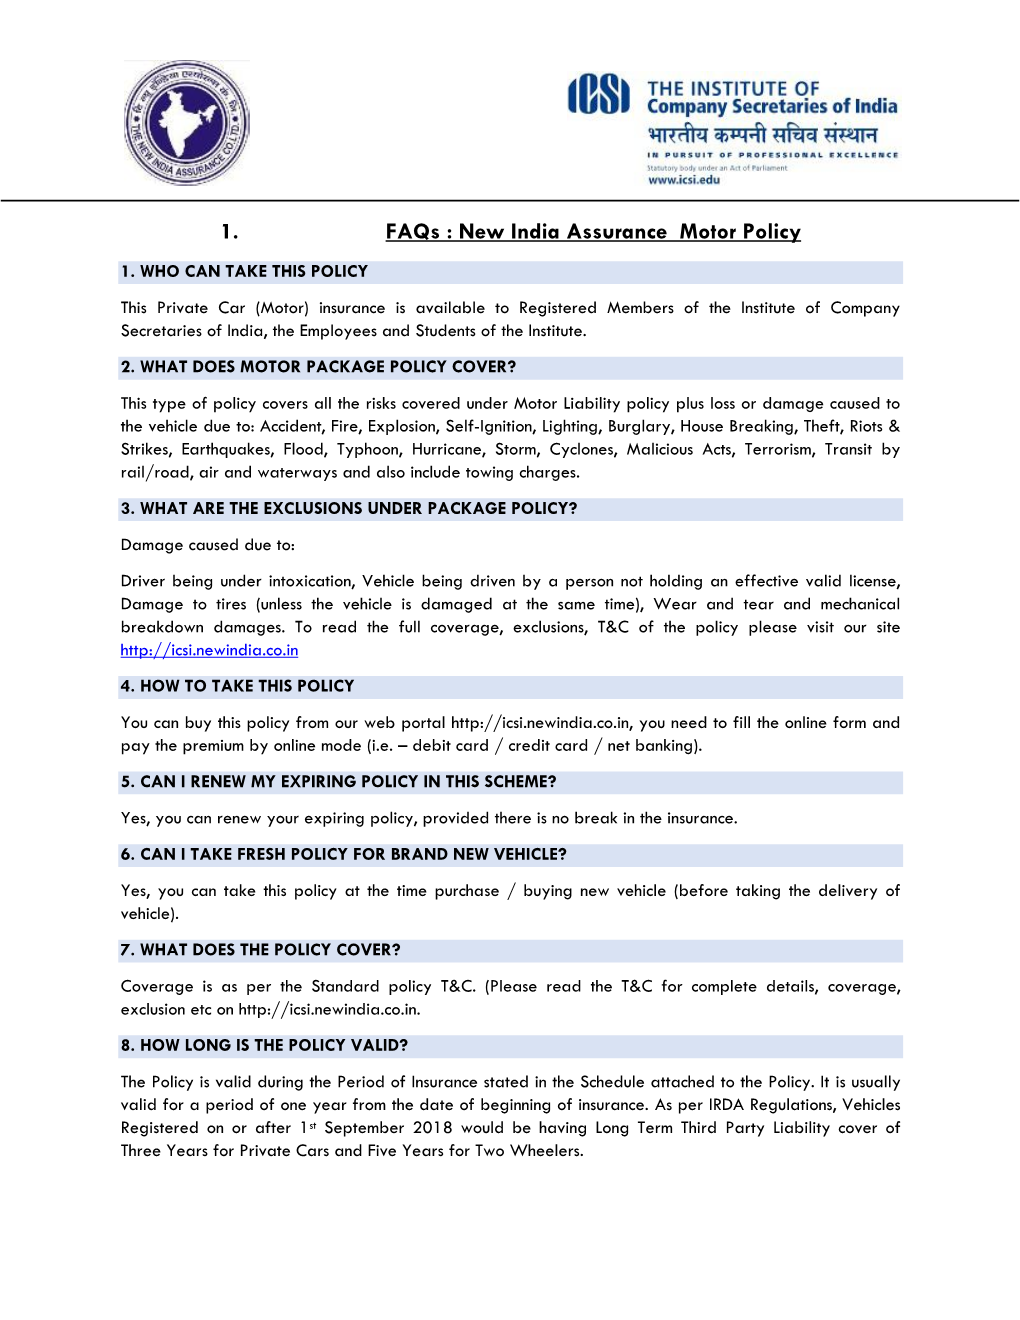 1. Faqs : New India Assurance Motor Policy